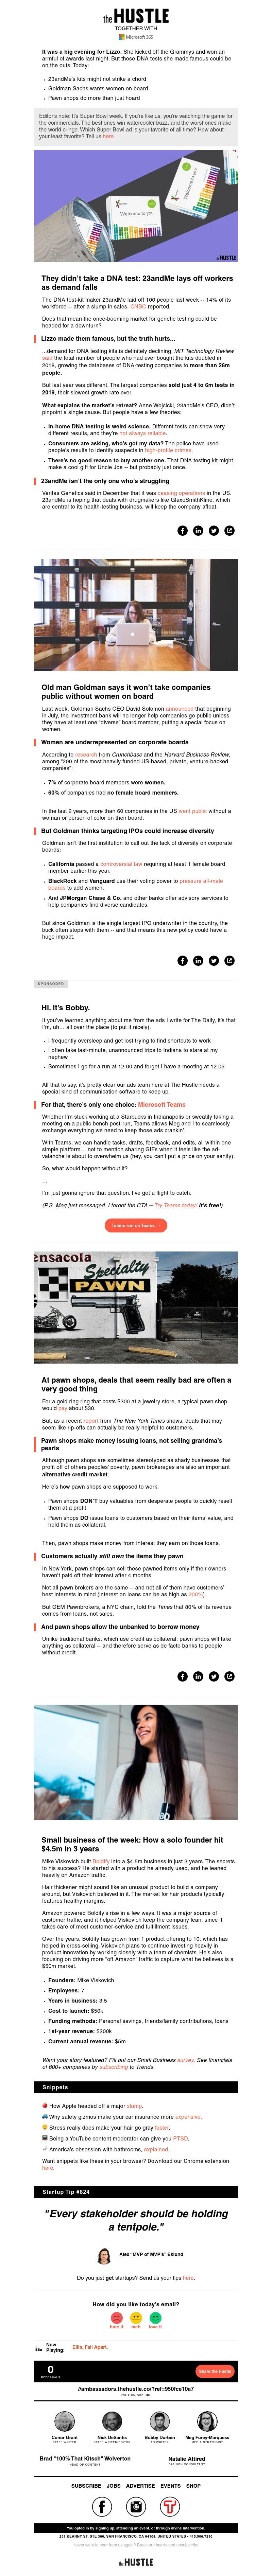 Screenshot of email with subject /media/emails/44f8c179-418a-4f55-b019-79d821a77540.png